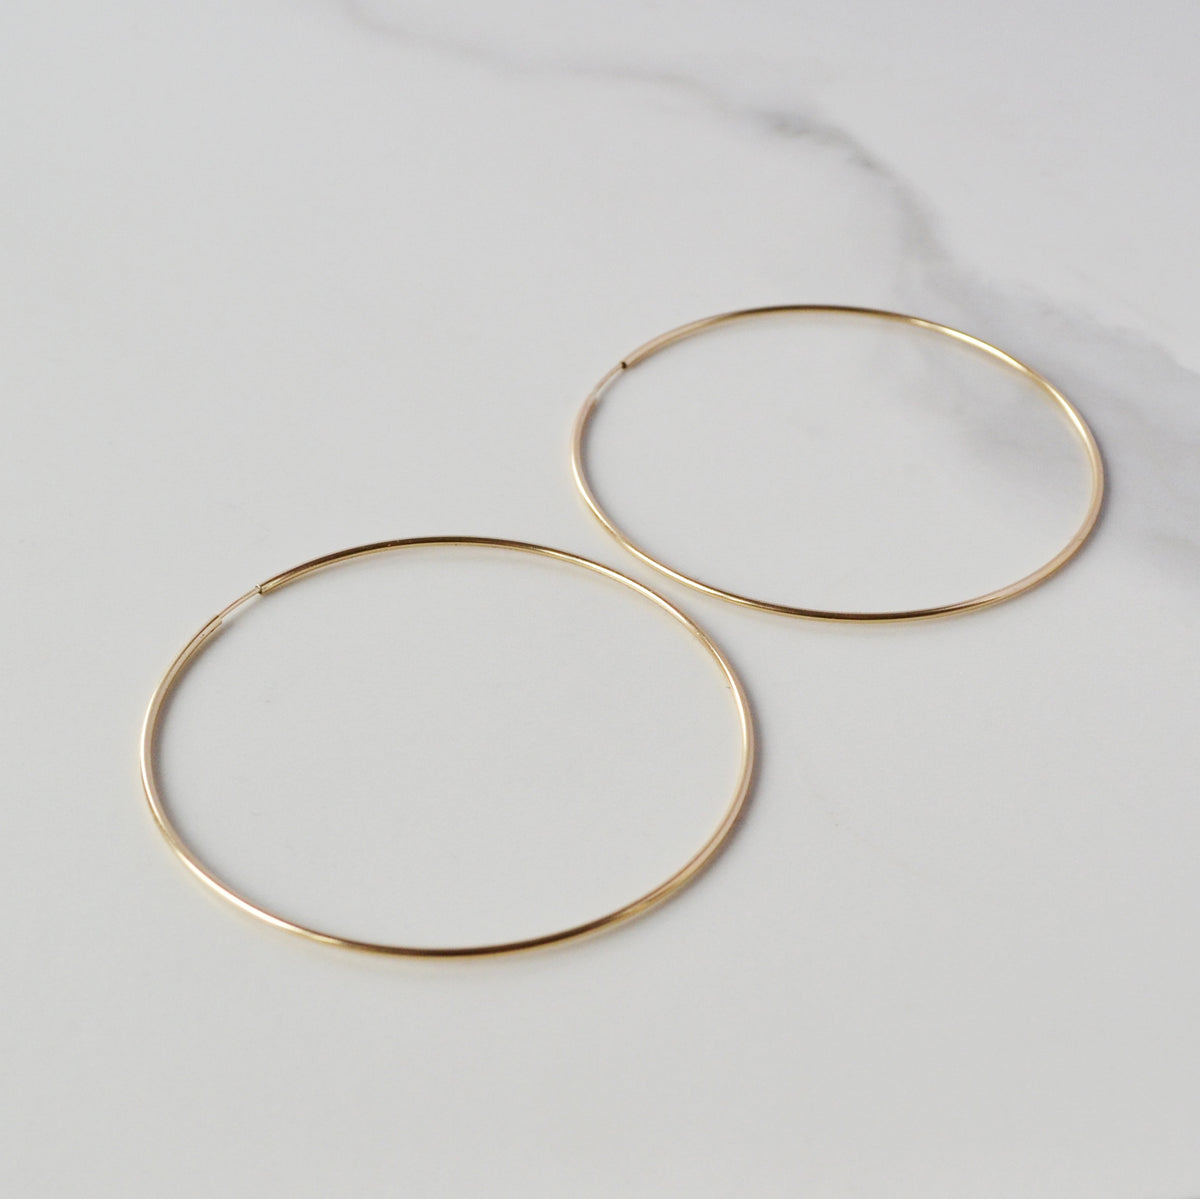 Thin Endless Hoop Earrings, Gold or Rose Gold